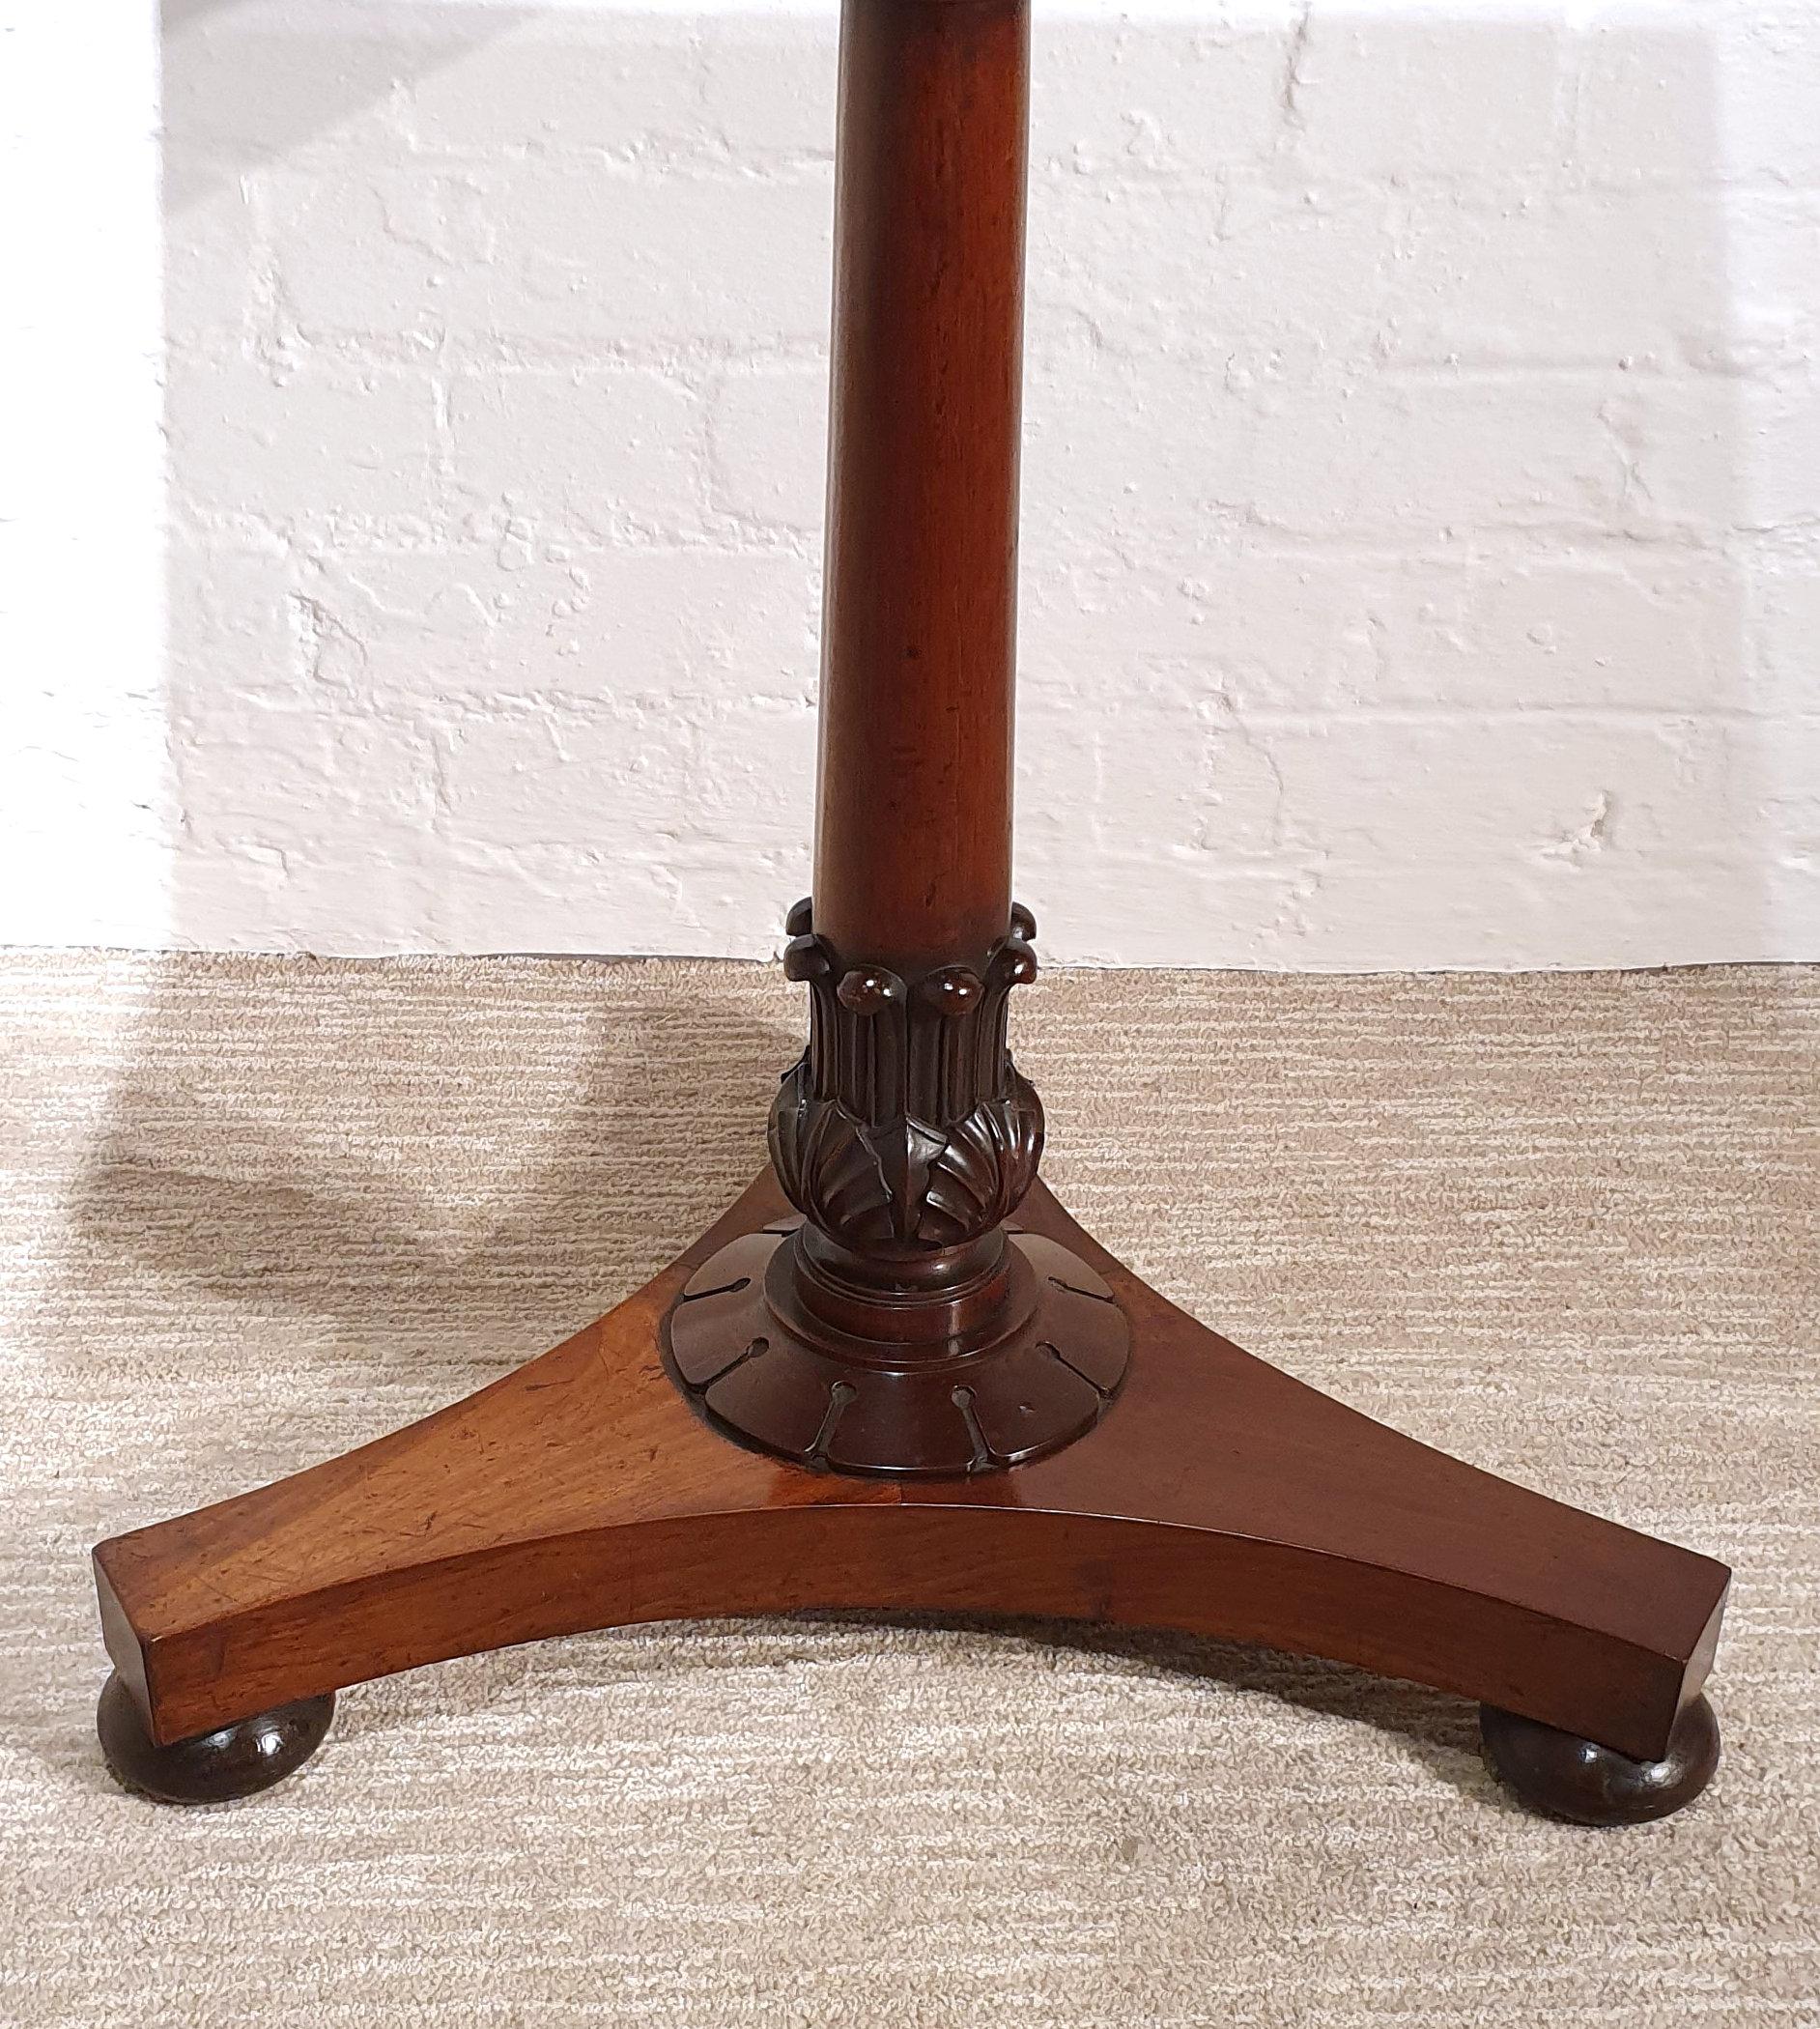 This lovely and petite sized flame mahogany side table swivels and opens up to reveal a games table. The inside has a green baize surface with a shallow storage compartment to store games pieces and cards. It is supported on a central pedestal base